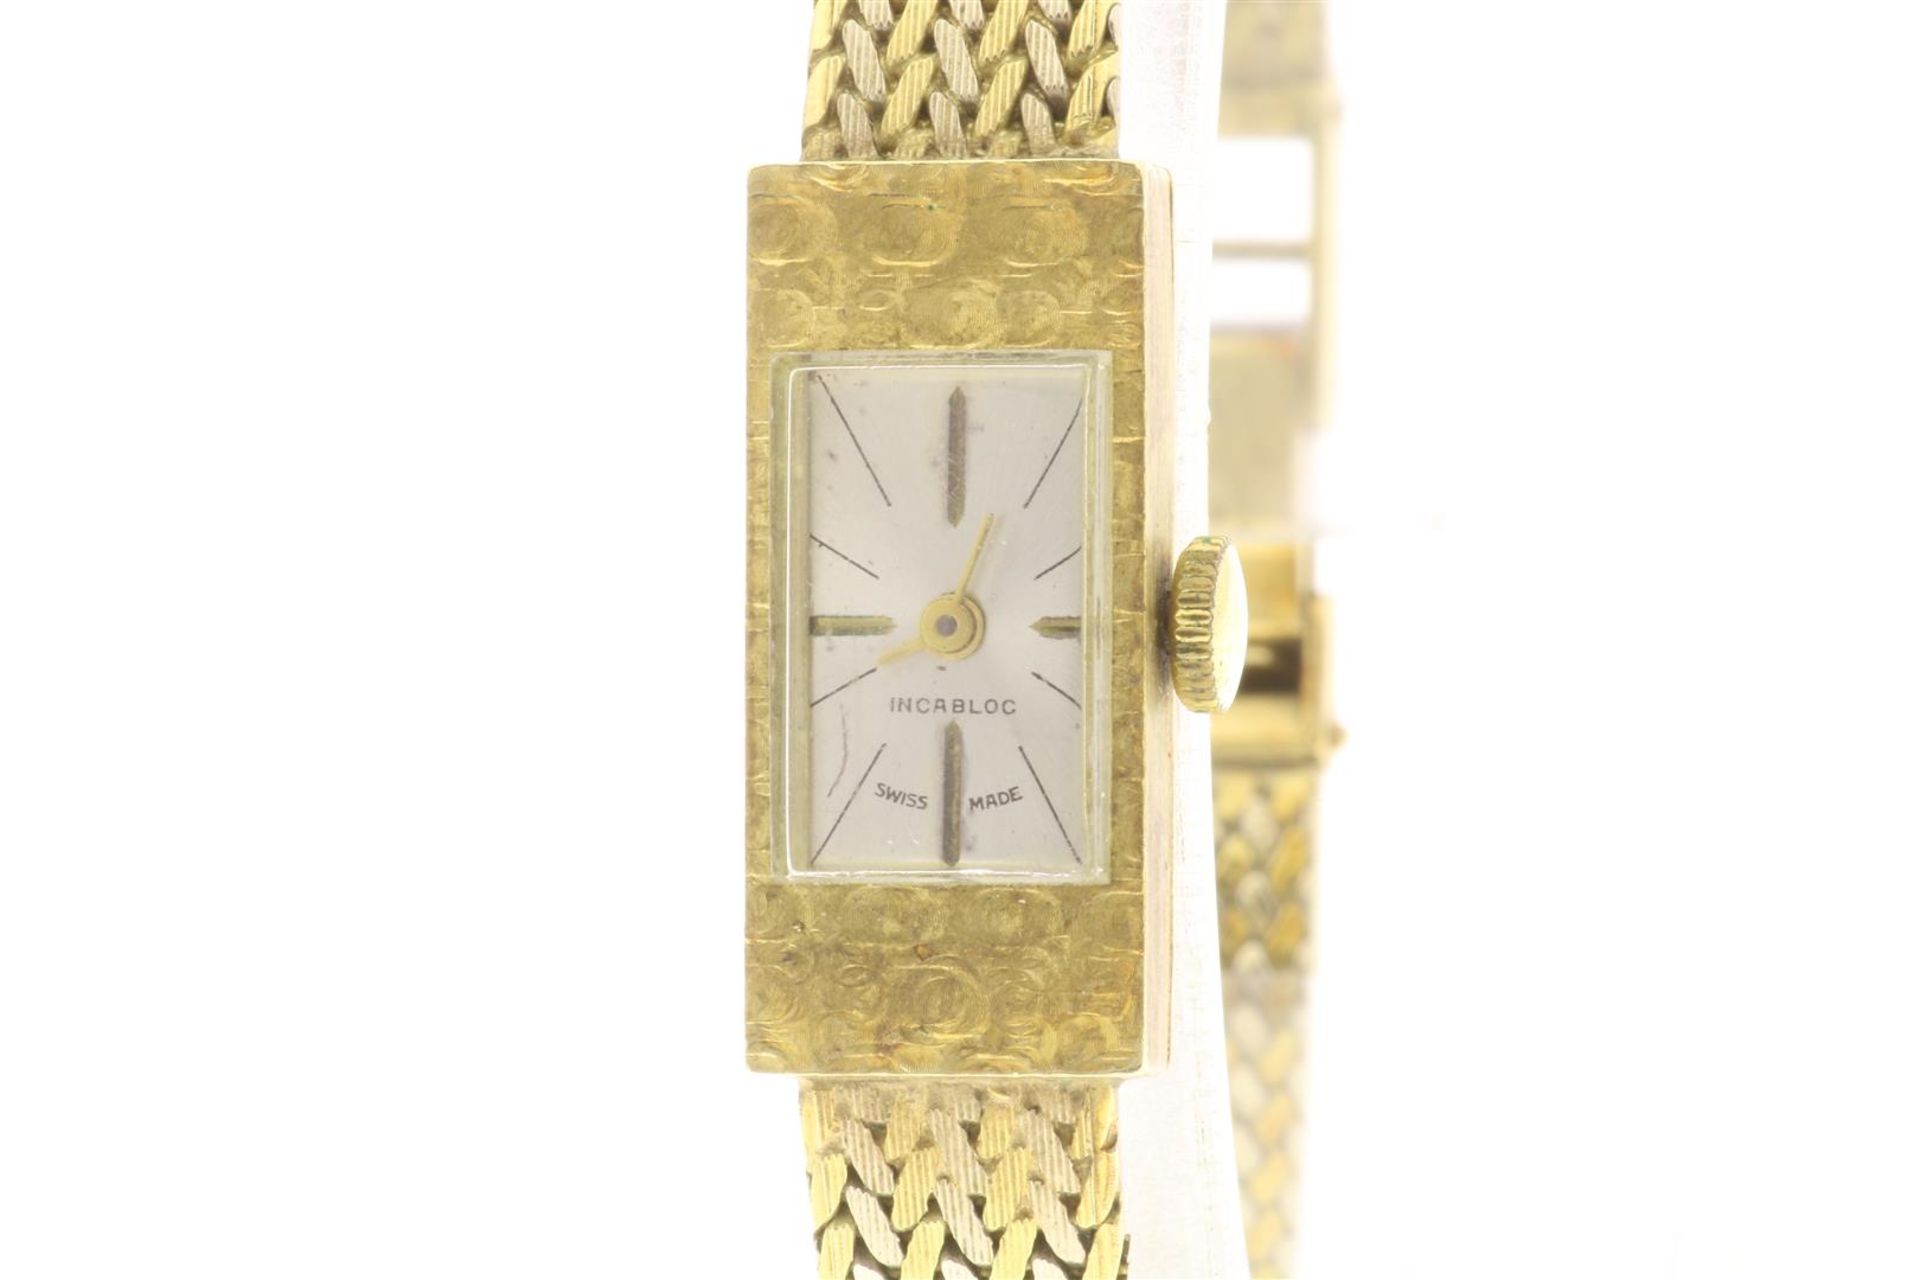 INCABLOC, Swiss made, yellow gold ladies wristwatch, weight 24 grams, memory. 585/000